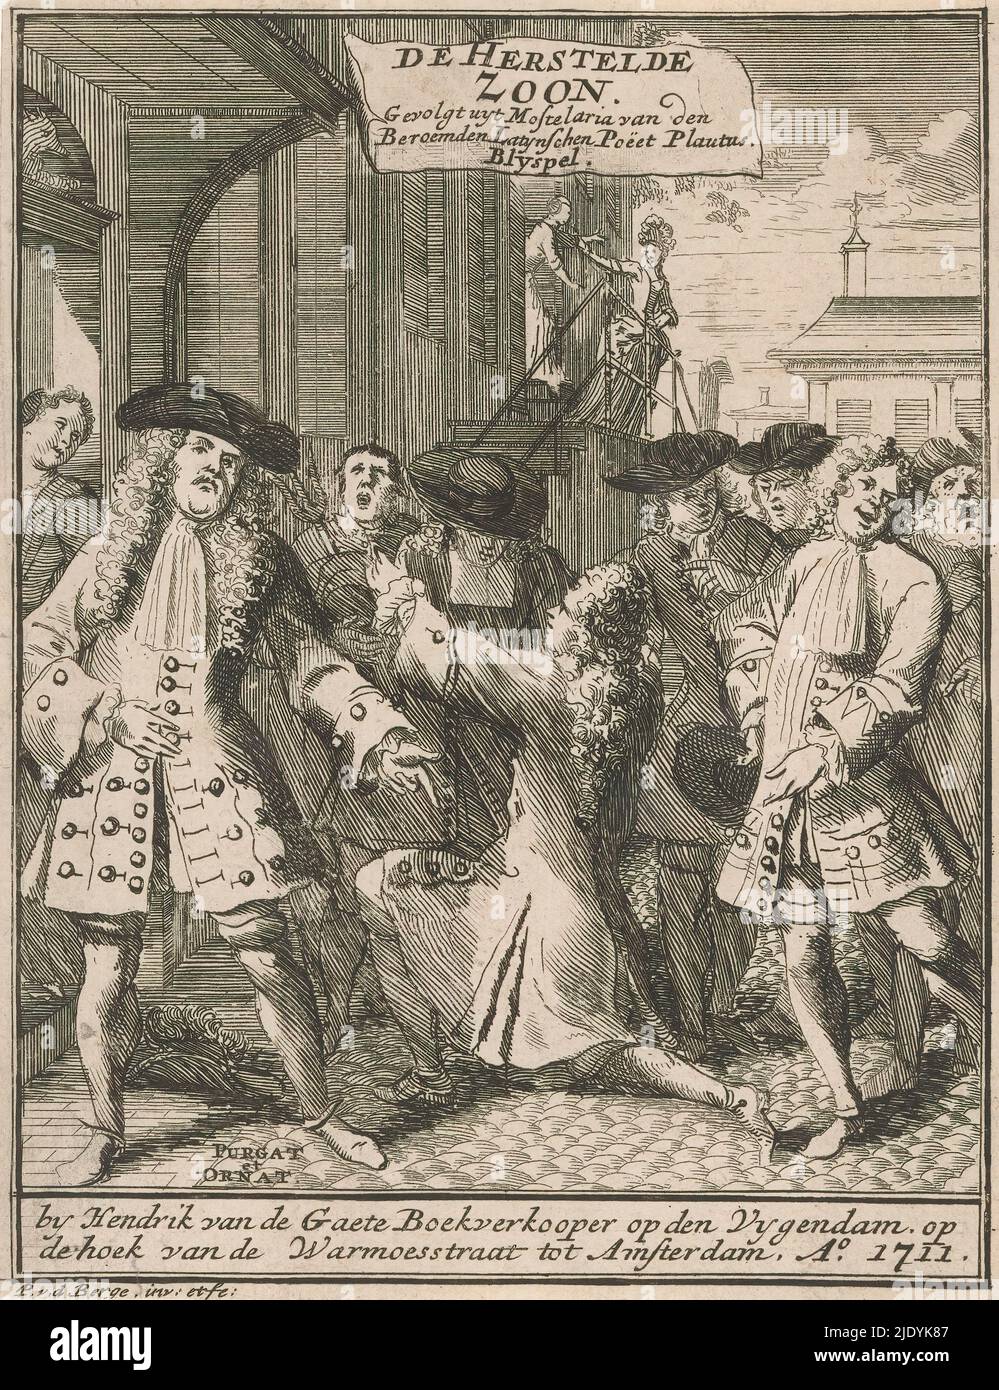 Young man kneels and embraces man with hat, Title page for: Hendrik van Halmael, The Deuced Son, 1711, Amid a group of men, a young man kneels and embraces the man with hat in front of him. On the left, a man with hat and angry gaze points to the scene. In the background, two women stand on a platform. Below left, the author's aphorism: Purgat and ornat., print maker: Pieter van den Berge, (mentioned on object), after own design by: Pieter van den Berge, (mentioned on object), publisher: Hendrik van de Gaete, (mentioned on object), Amsterdam, 1711, paper, etching, height 158 mm × width 123 mm Stock Photo